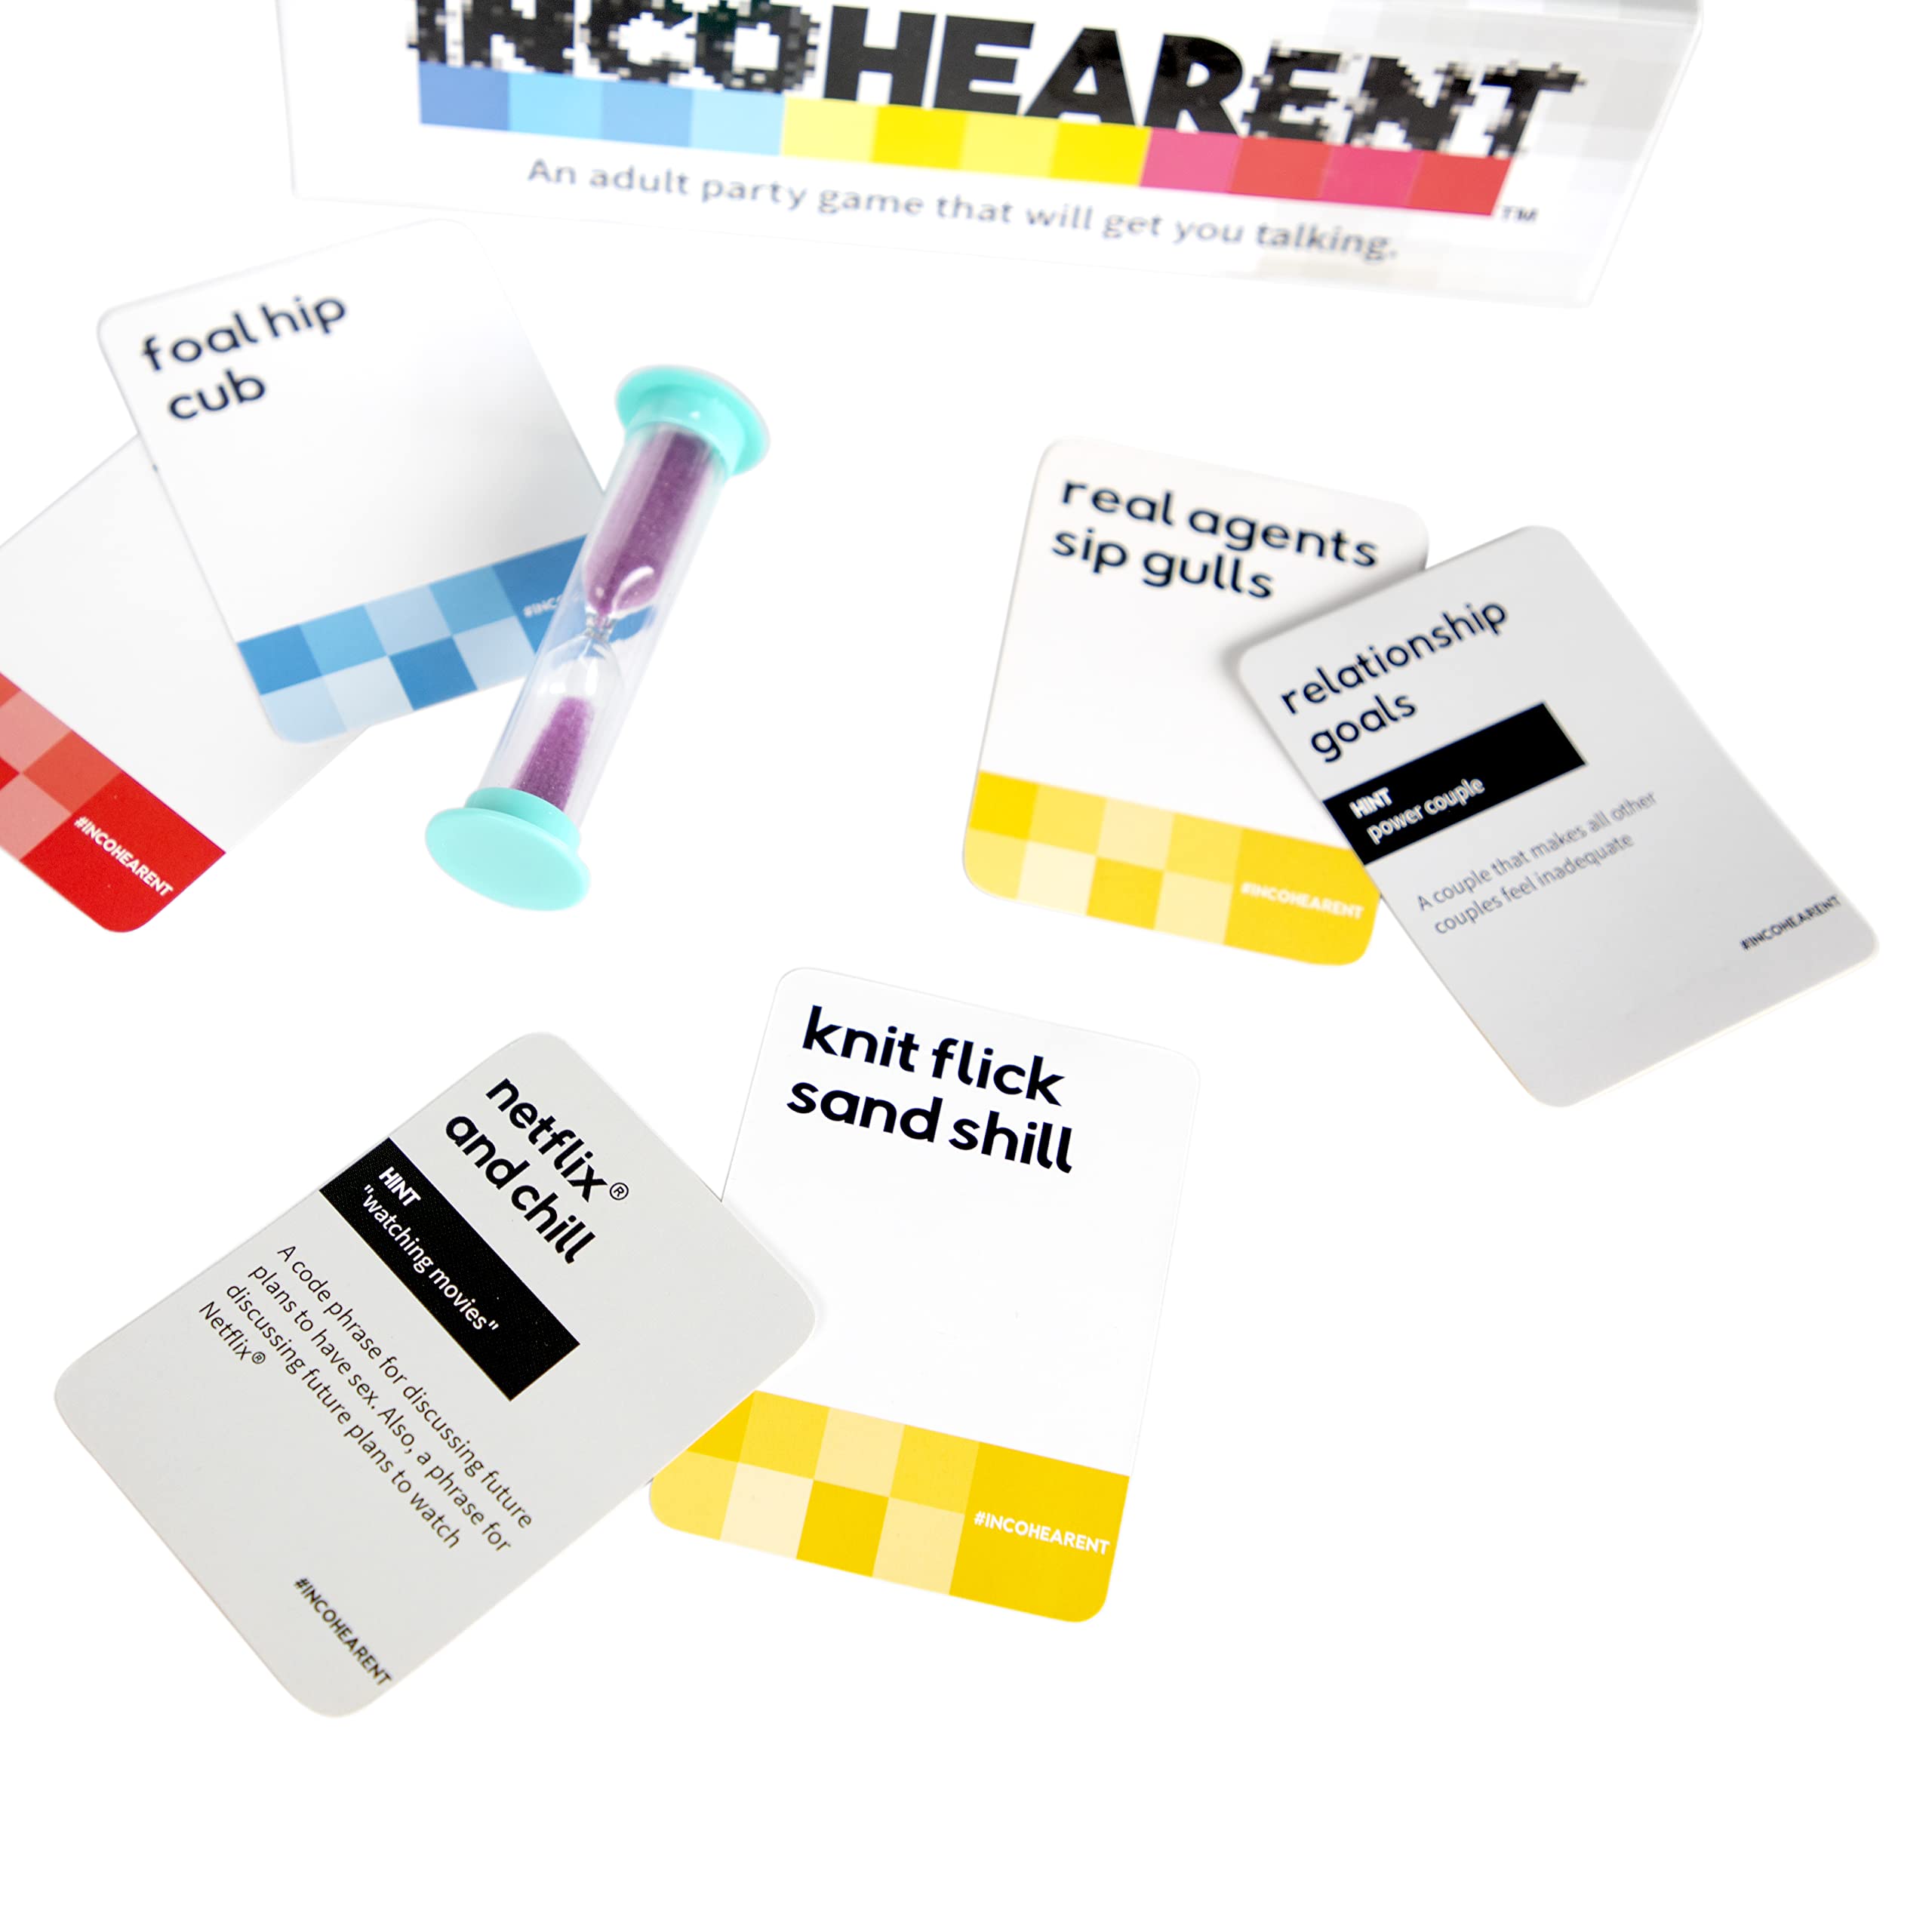 WHAT DO YOU MEME? Incohearent - The Party Game Where You Compete to Guess The Gibberish - Adult Card Games for Game Night